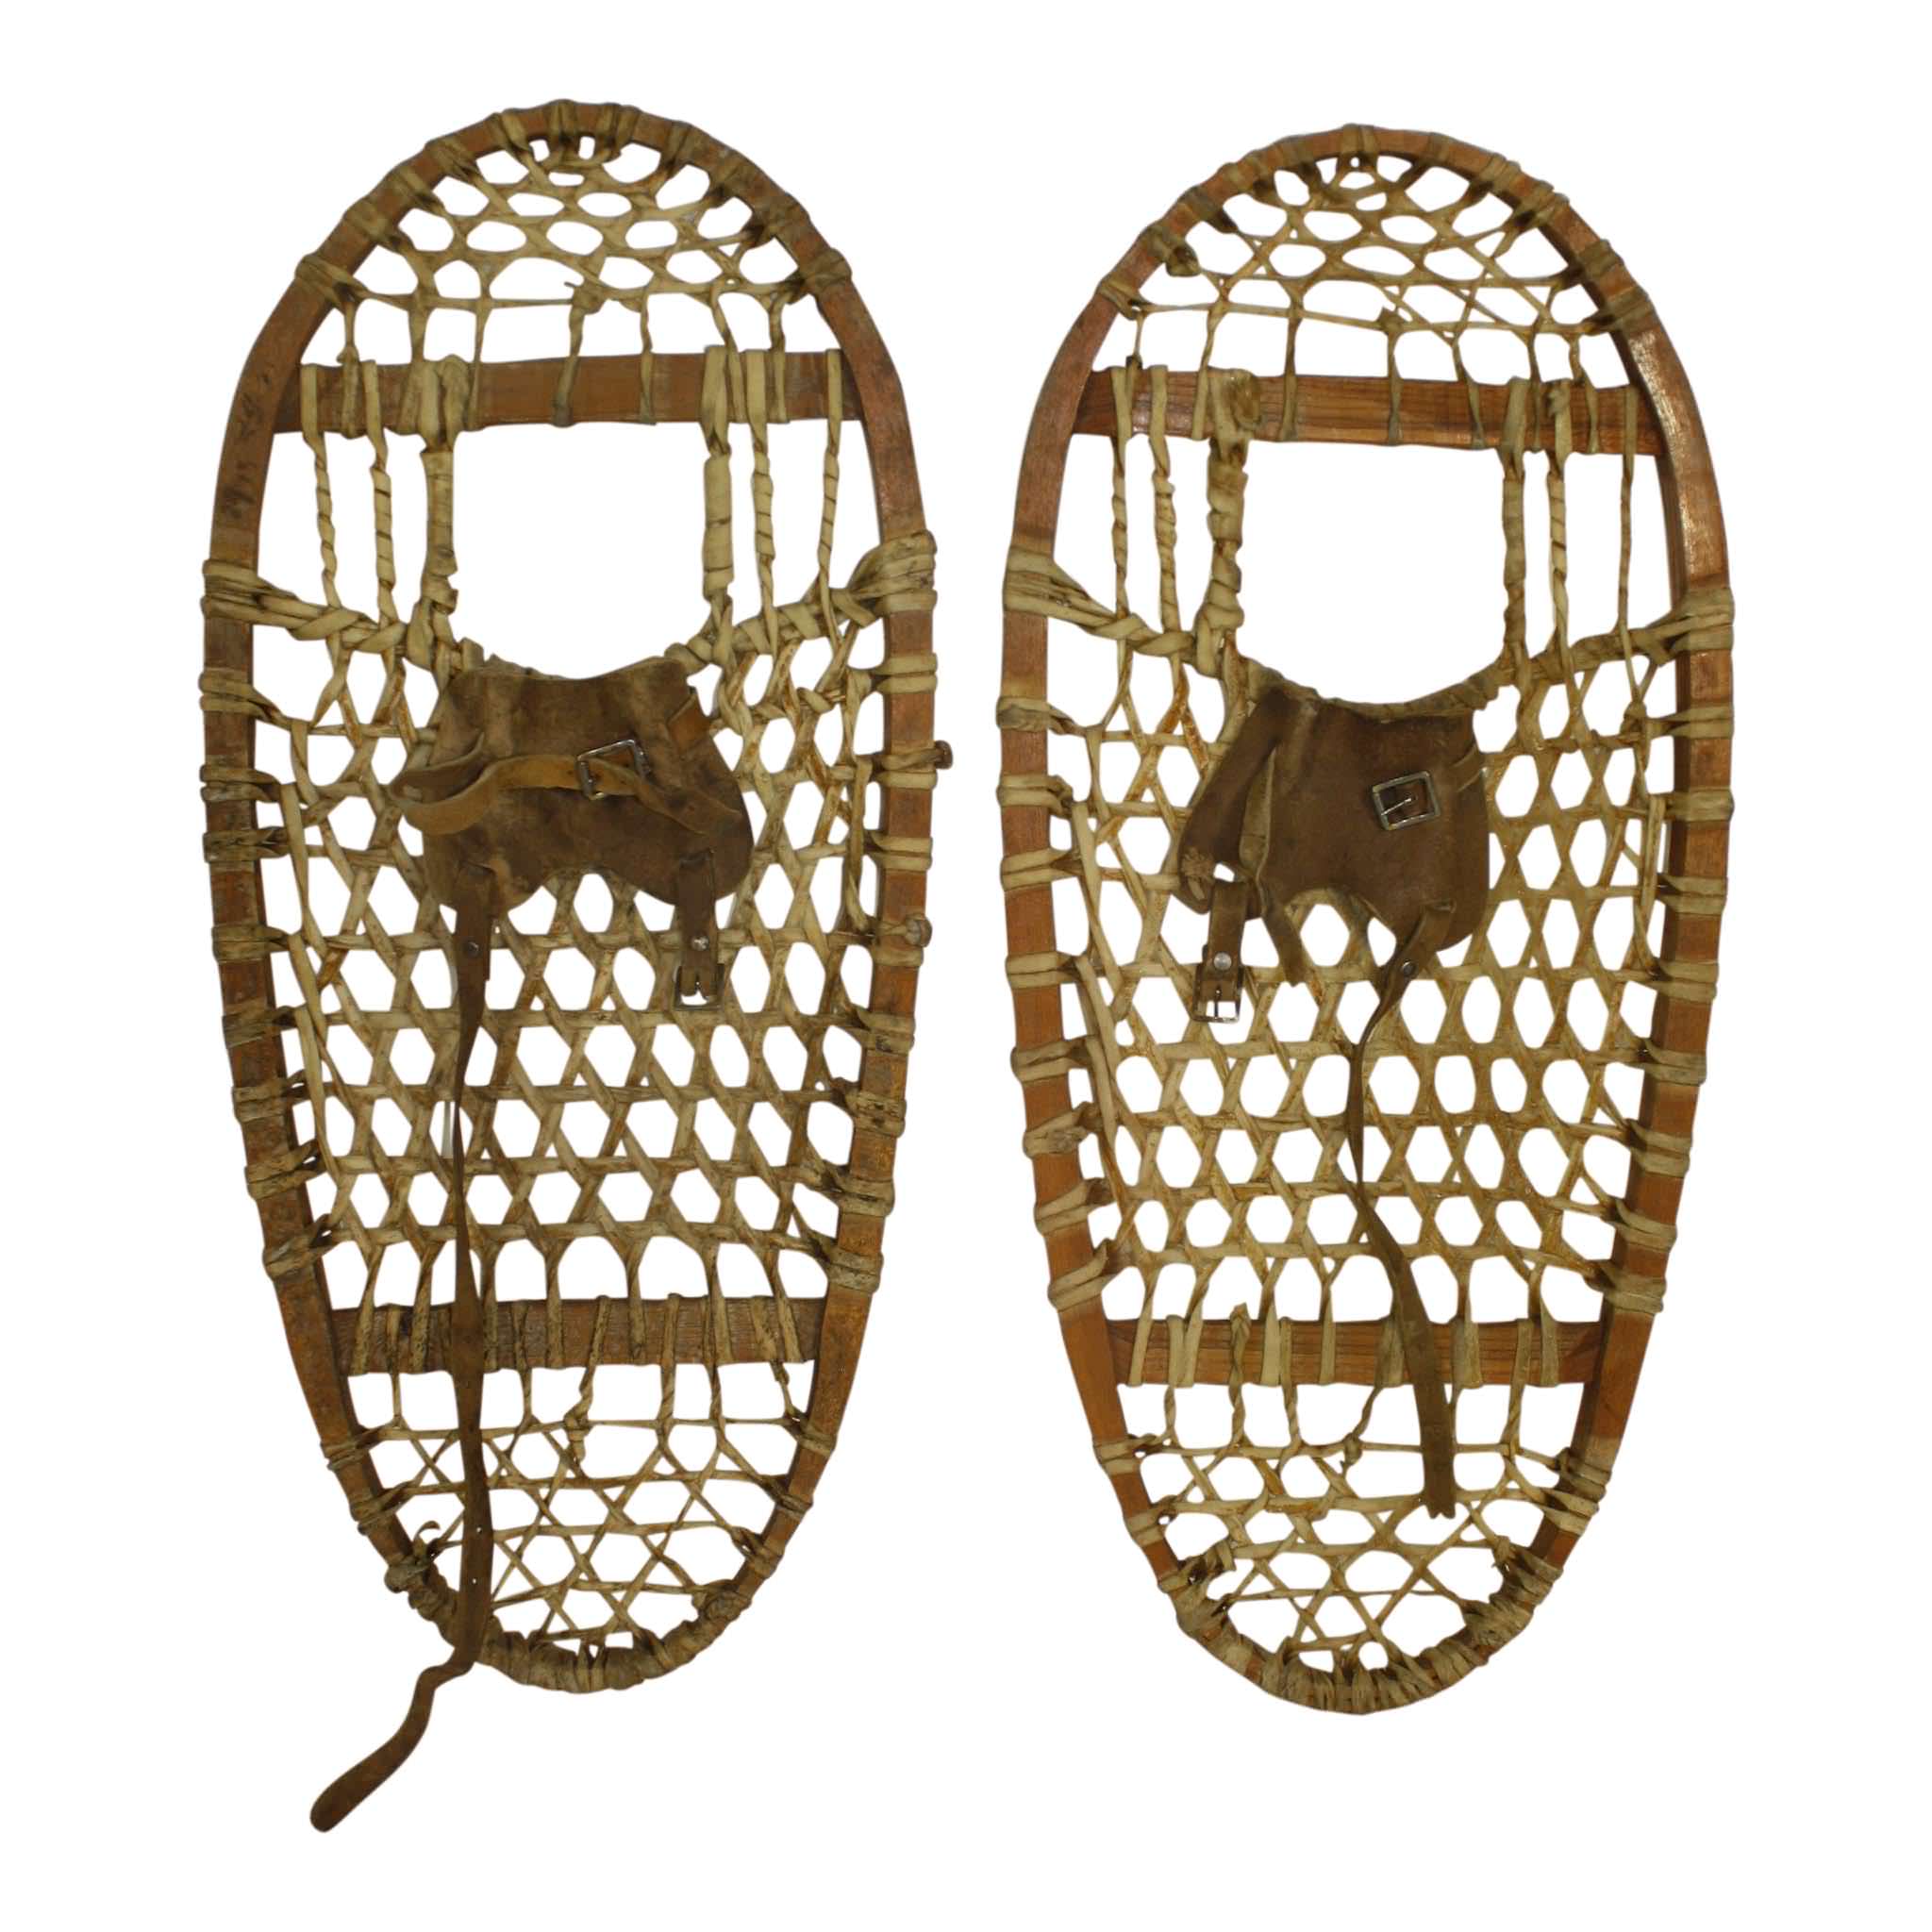 Canadian Bear Paw Snowshoes